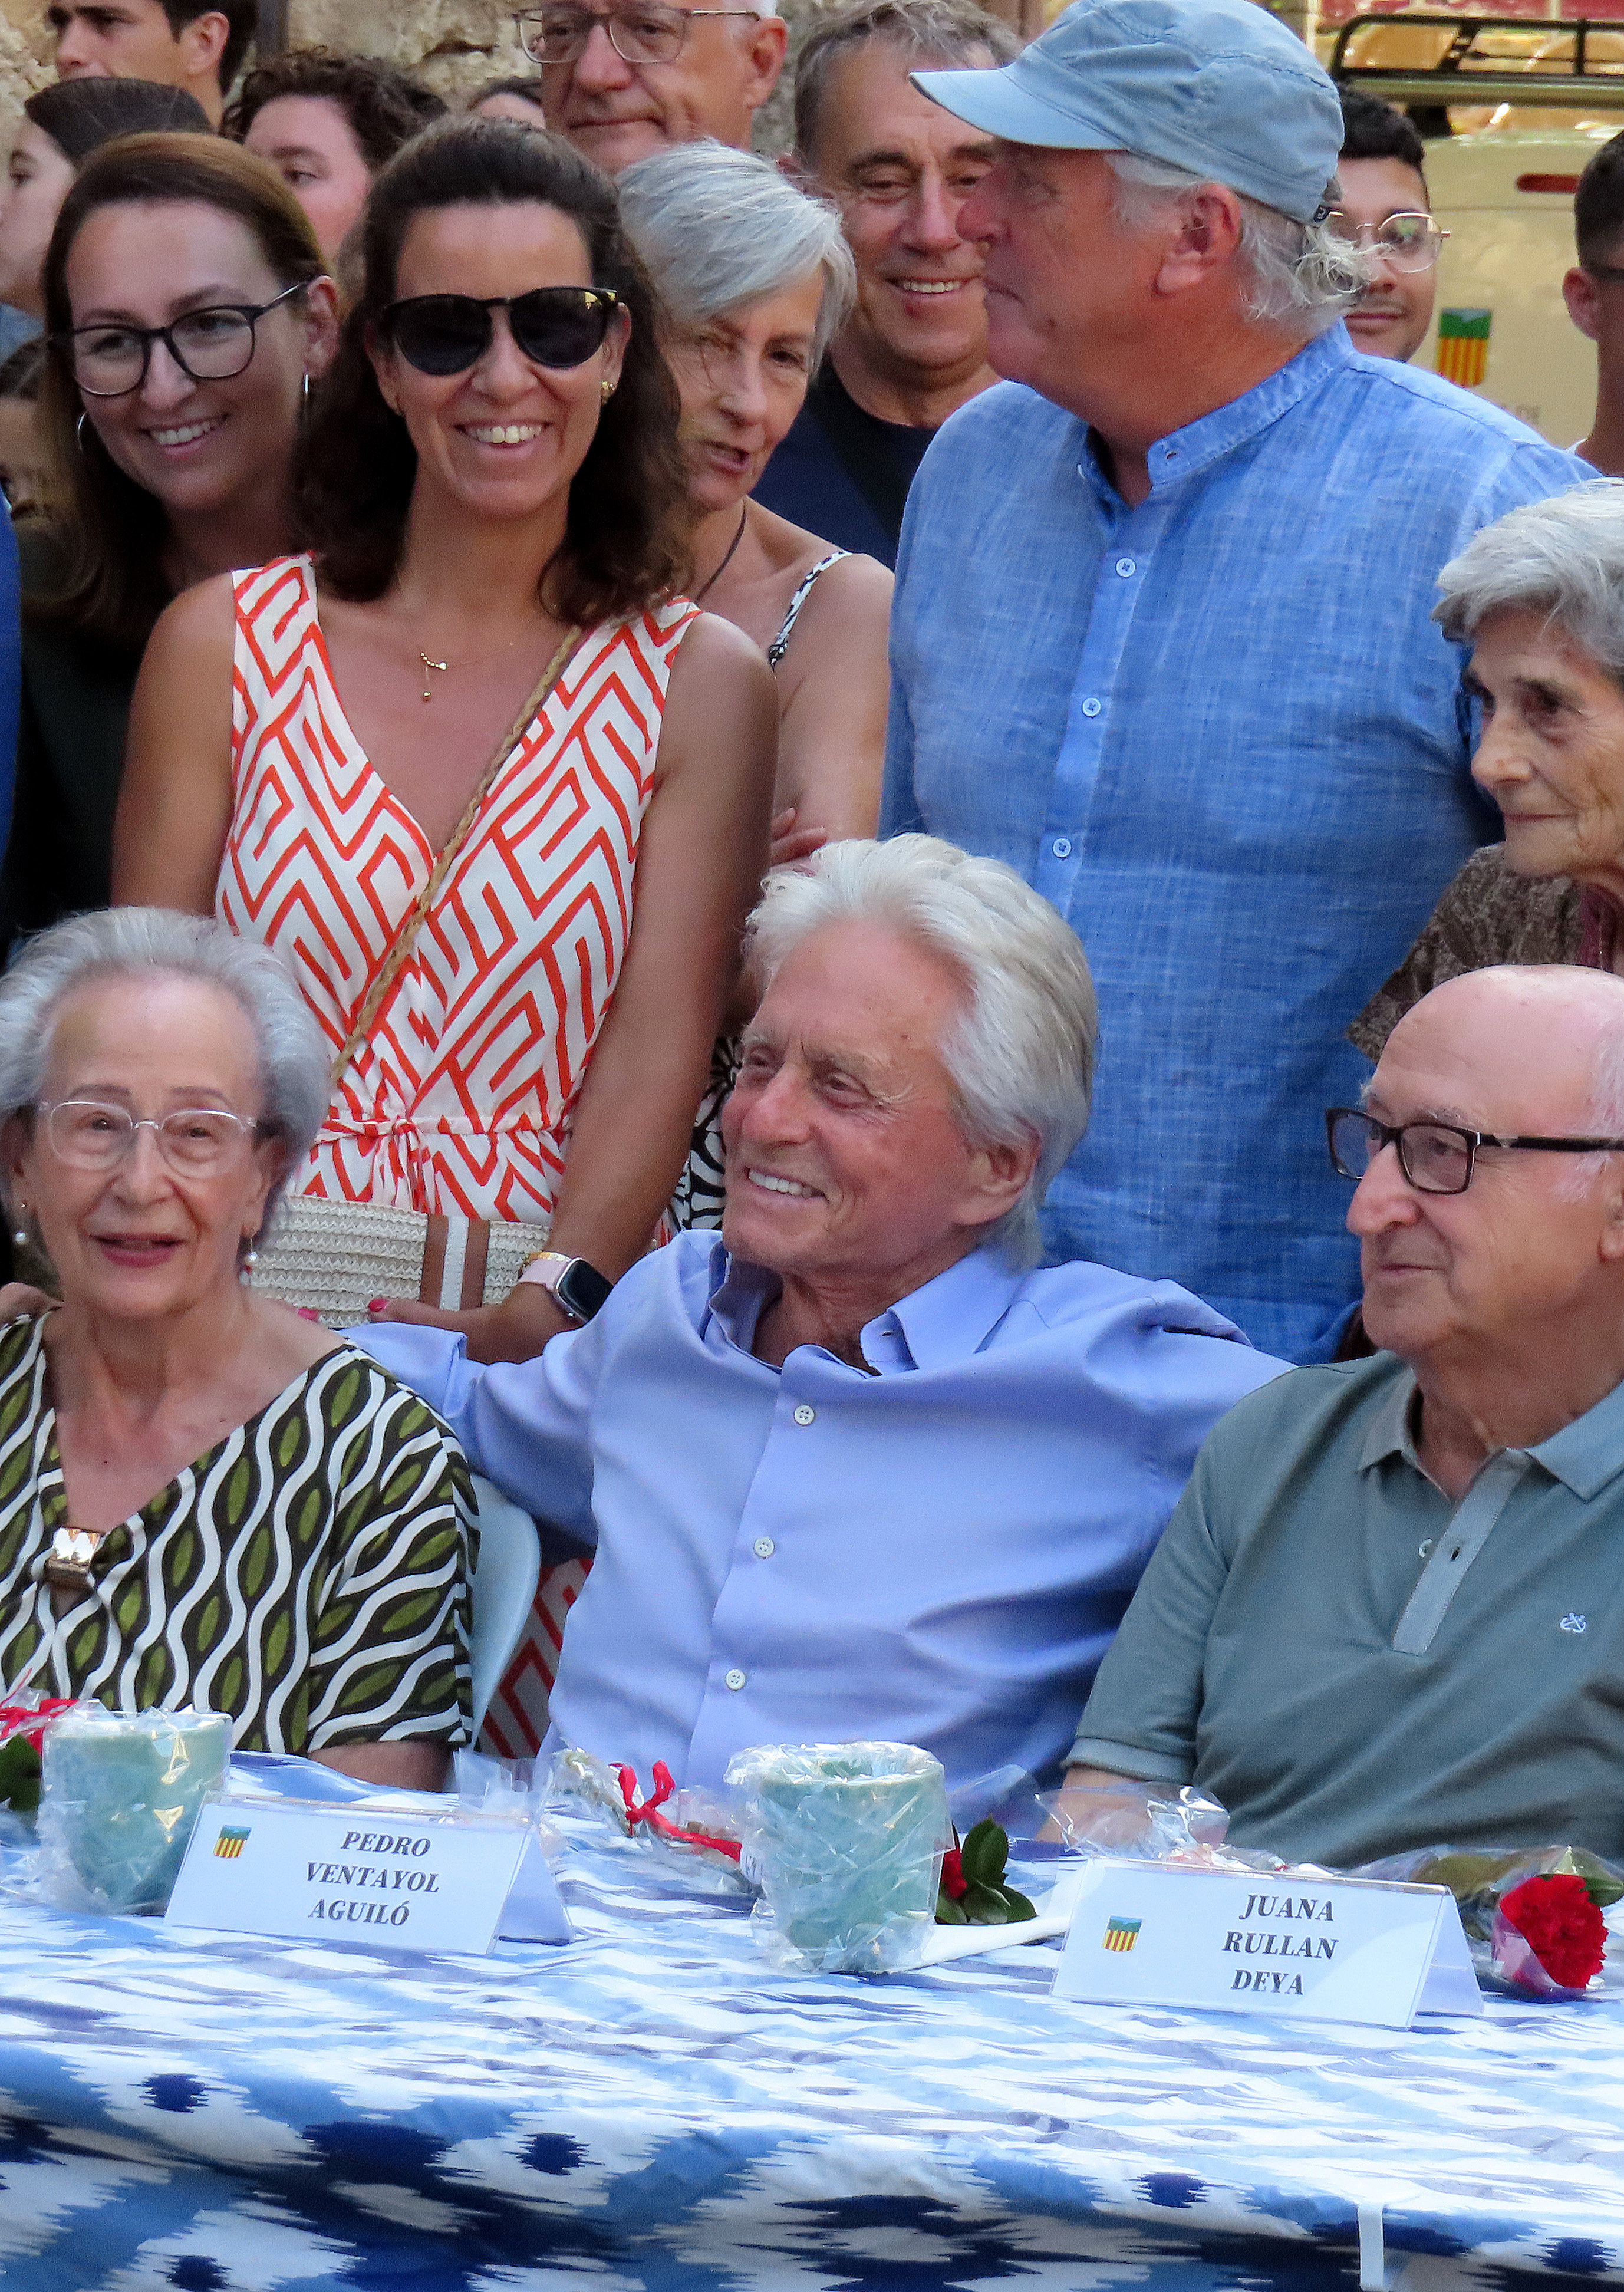 Michael Douglas looked youthful and full of life while enjoying the ceremony